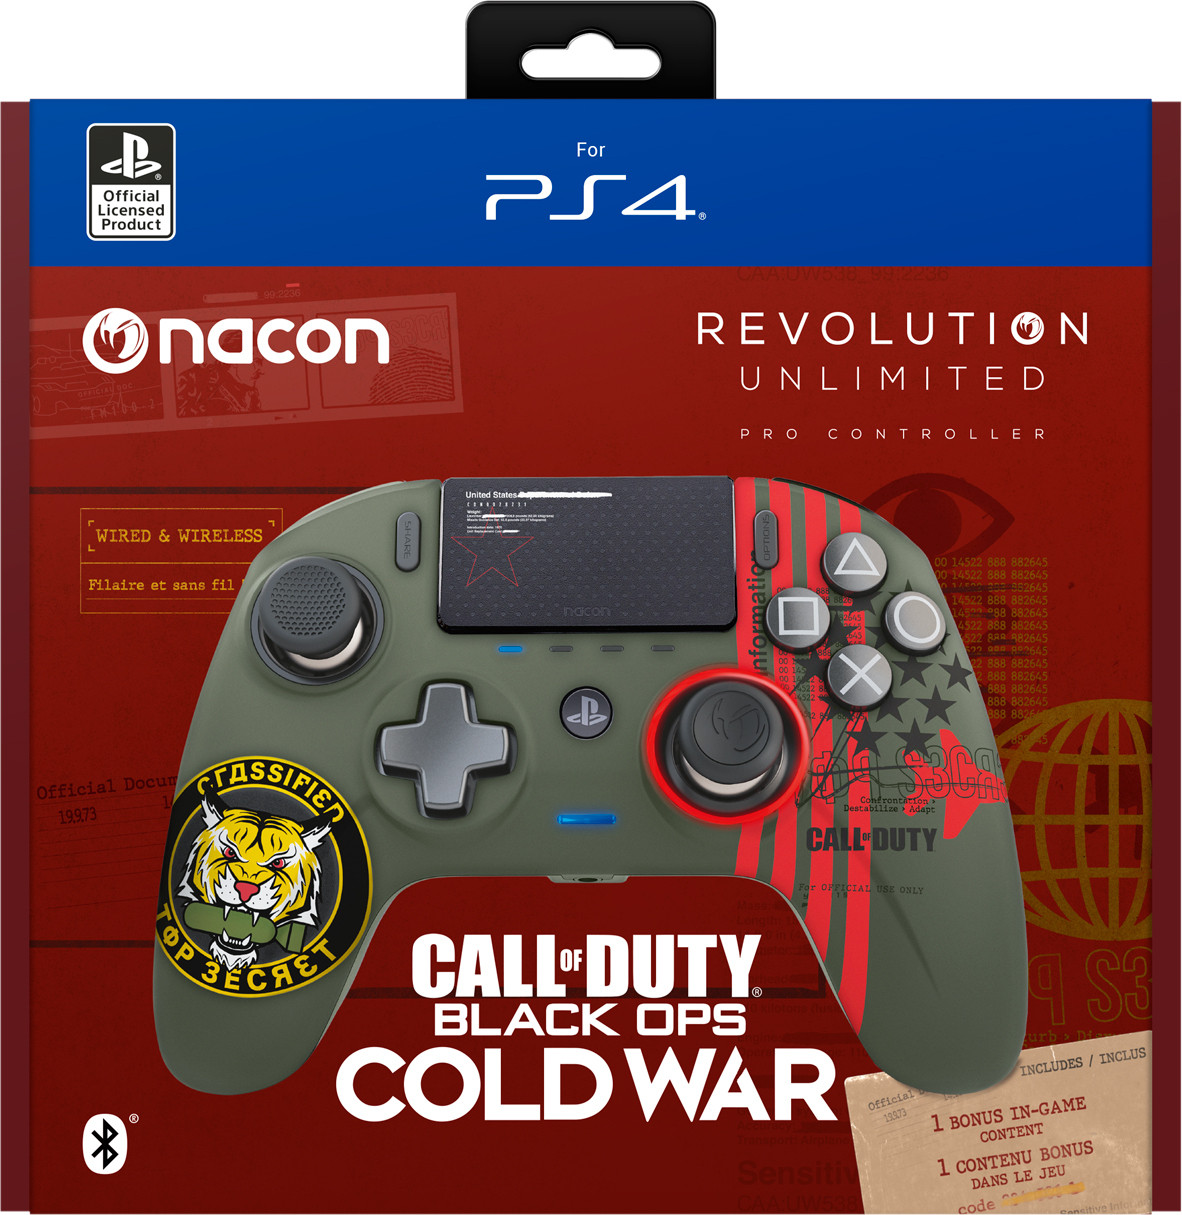 Nacon Revolution Unlimited Pro Controller Call of Duty Black Ops Cold War Limited Edition met grote korting